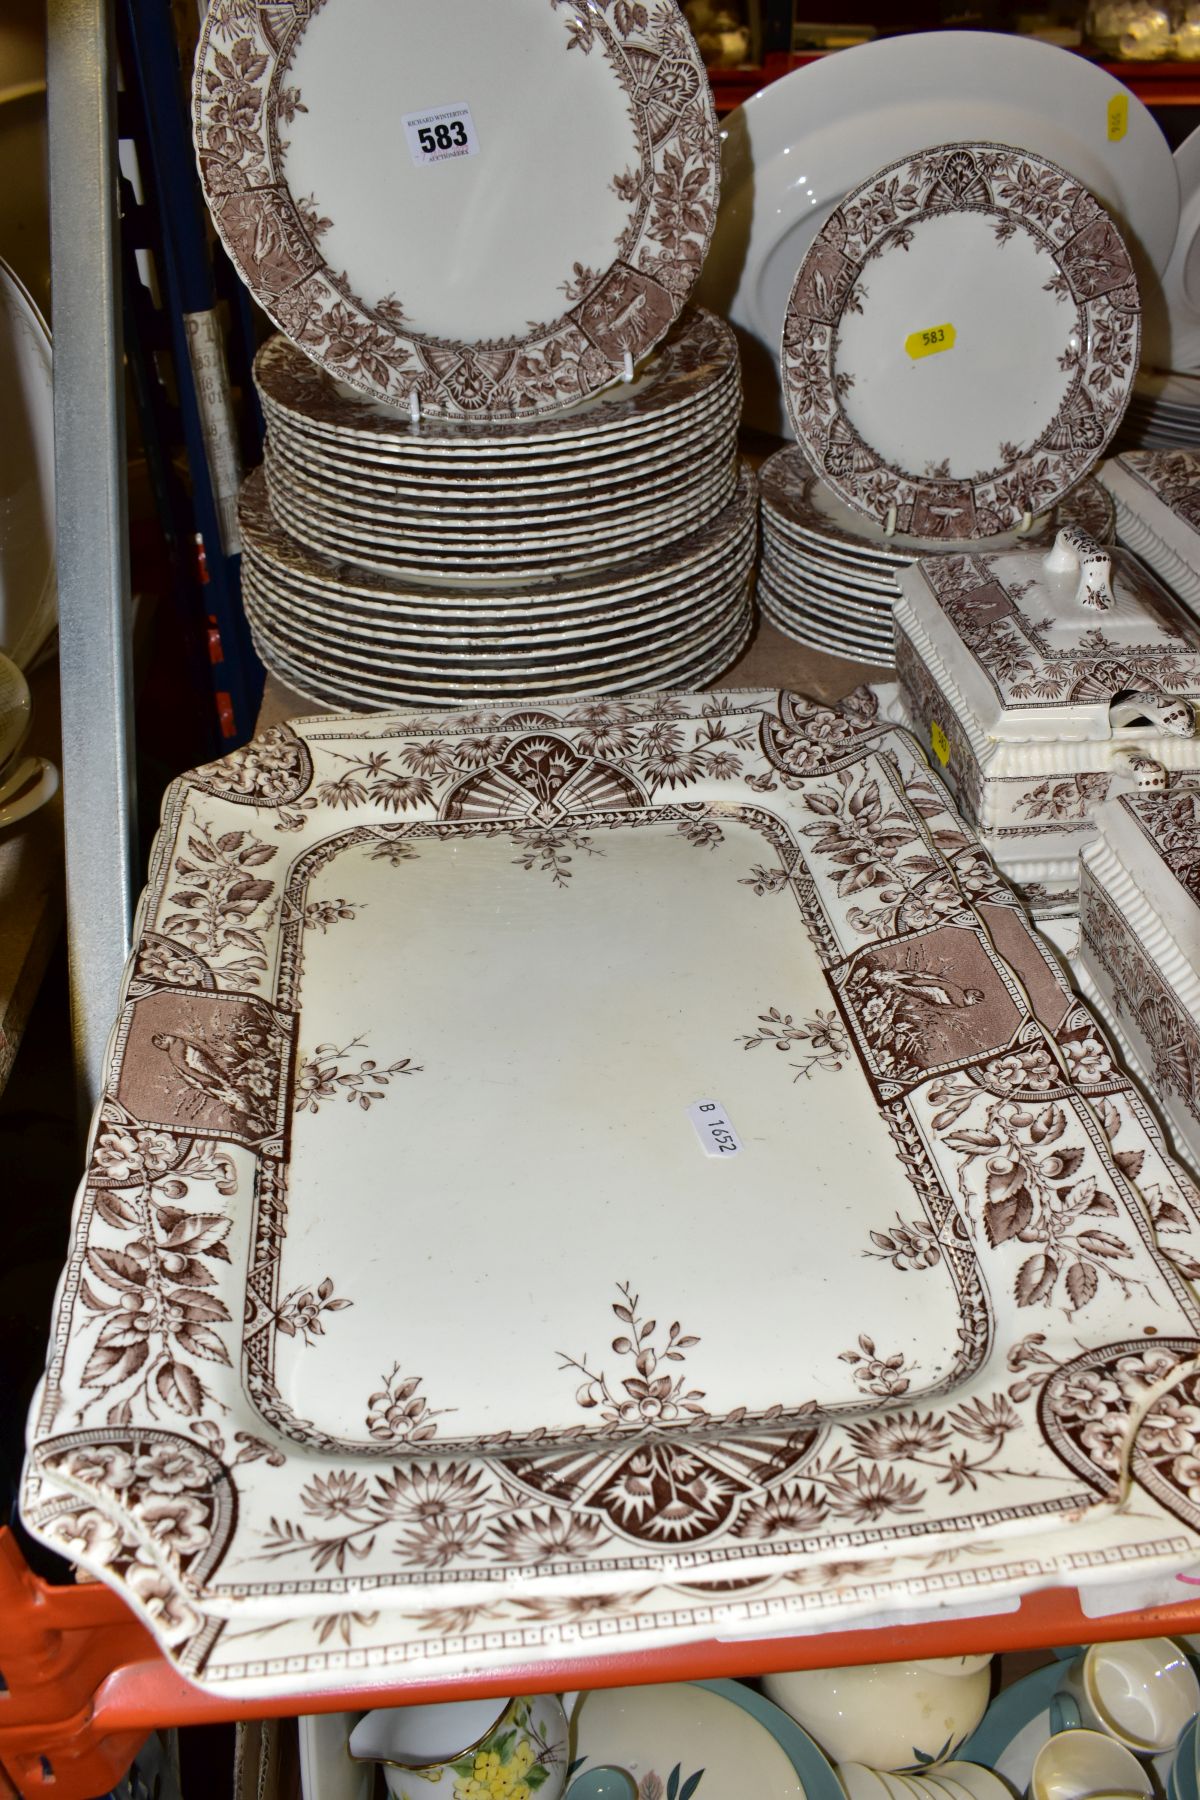 A LATE VICTORIAN EARTHENWARE DINNER SERVICE TRANSFER PRINTED IN BROWN WITH AN AESTHETIC STYLE DESIGN - Image 9 of 14